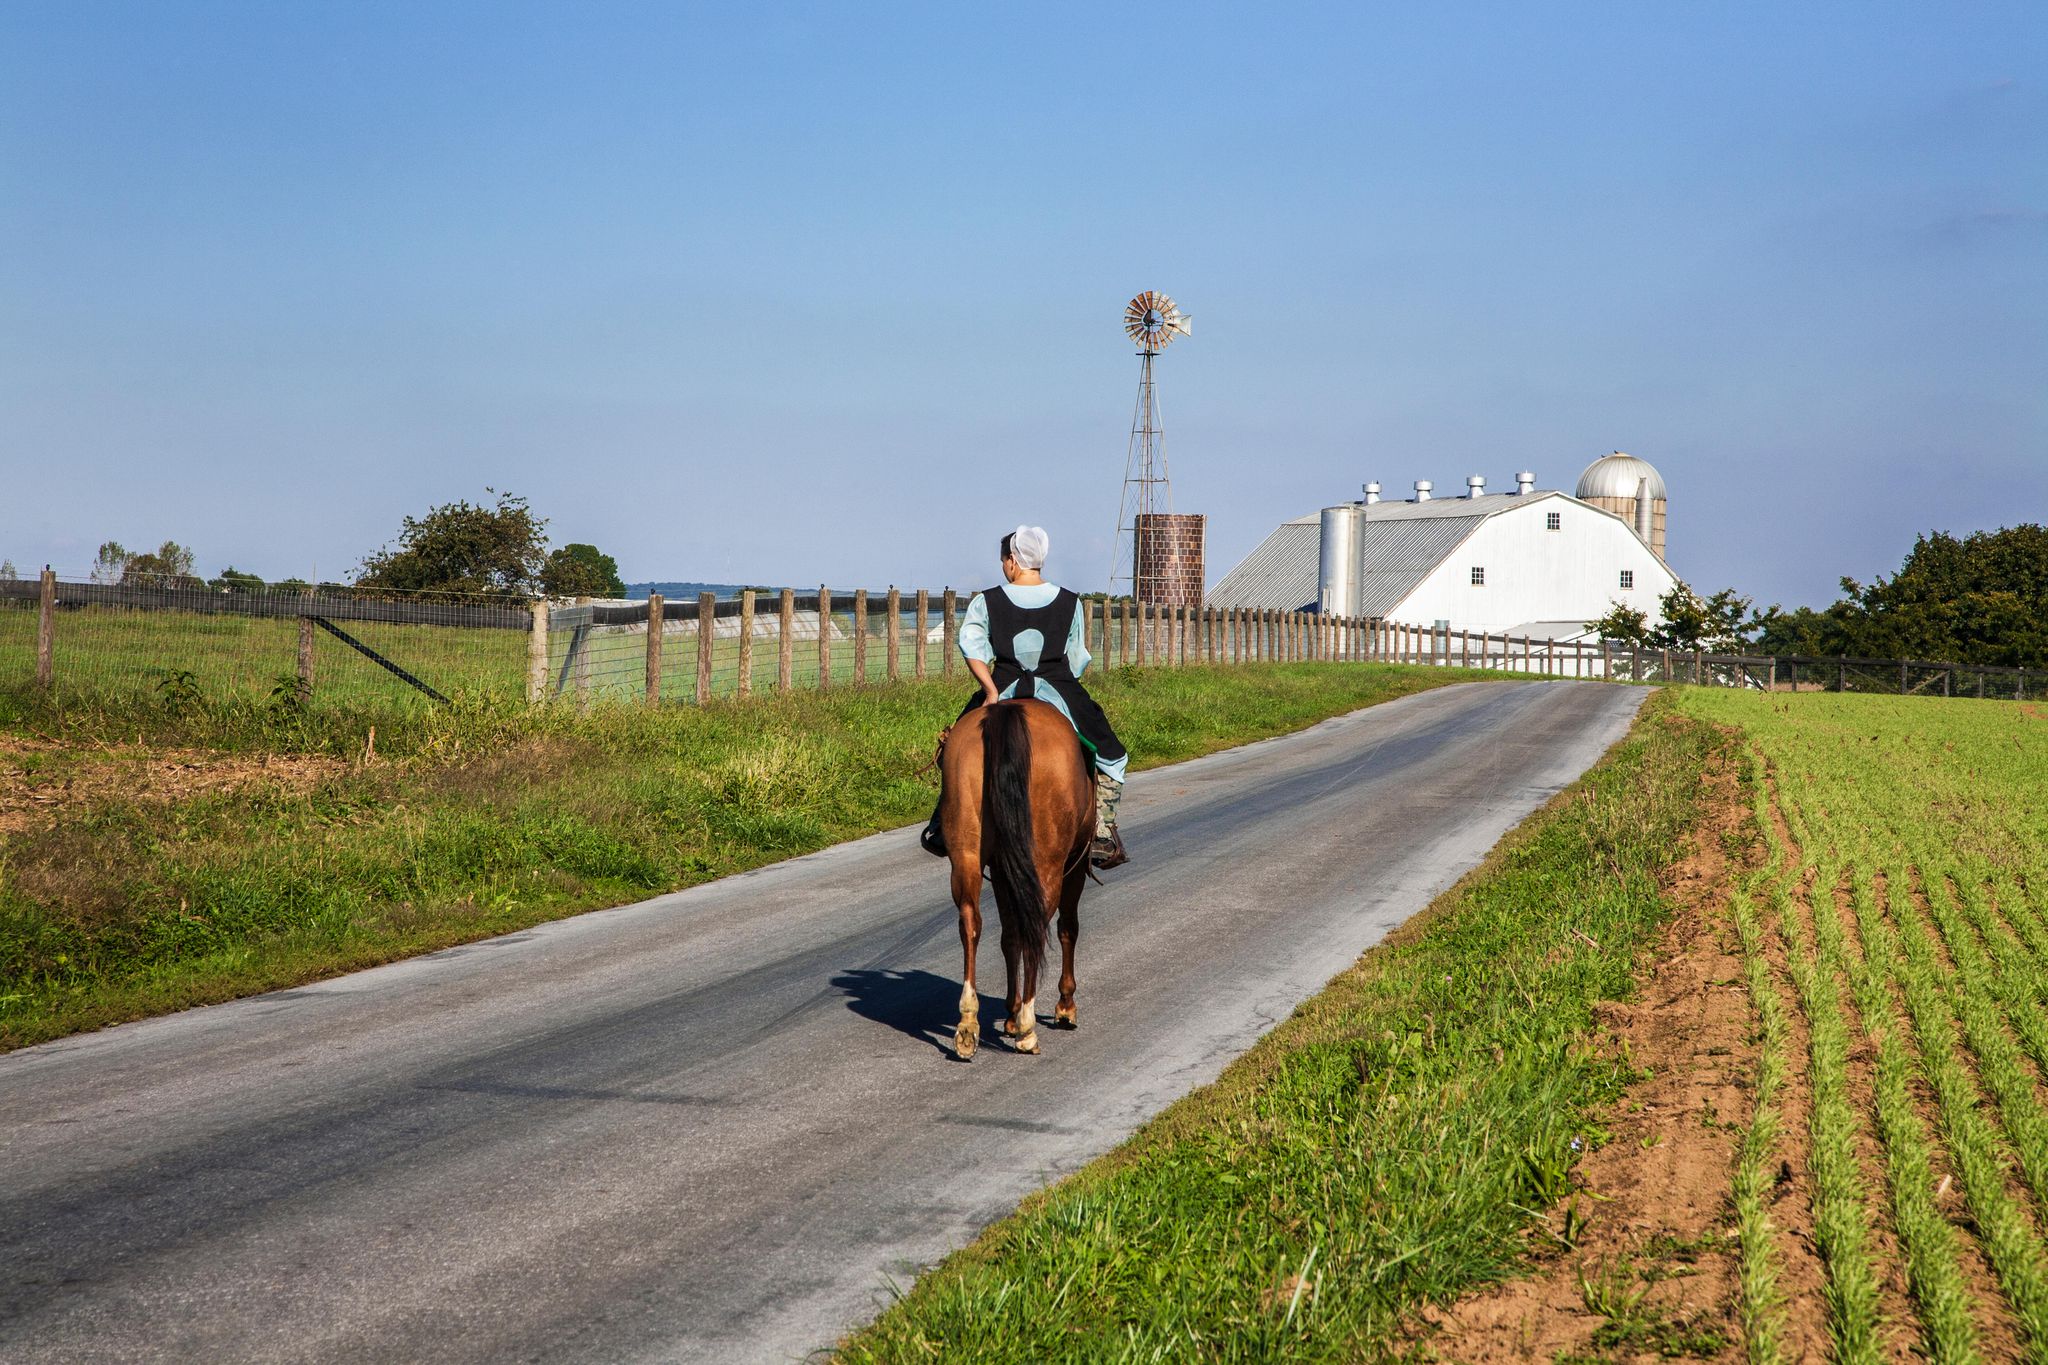 Horse, Bridle, Endurance riding, Trail riding, Road, Rein, Recreation, Mare, Infrastructure, Rural area, 